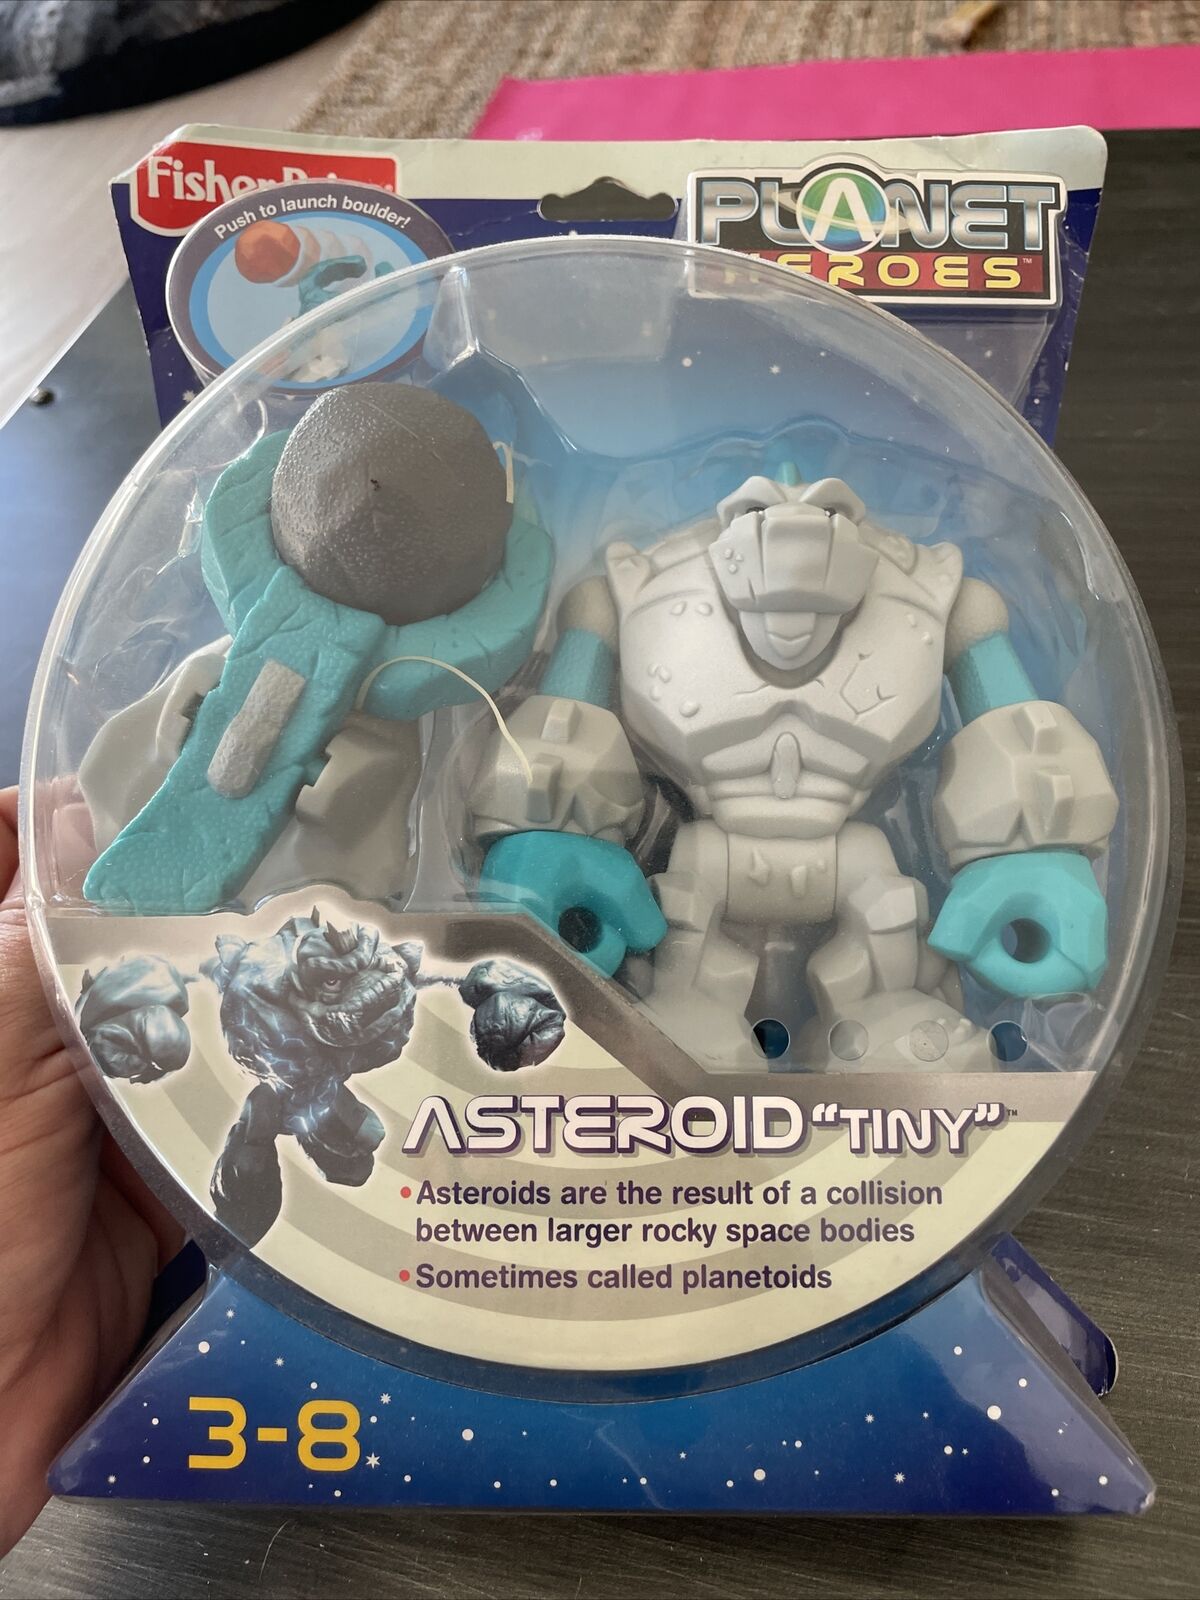 Fisher Price Planet Heroes Asteroid “tiny” Squad Figure New 2007 Figure Sealed